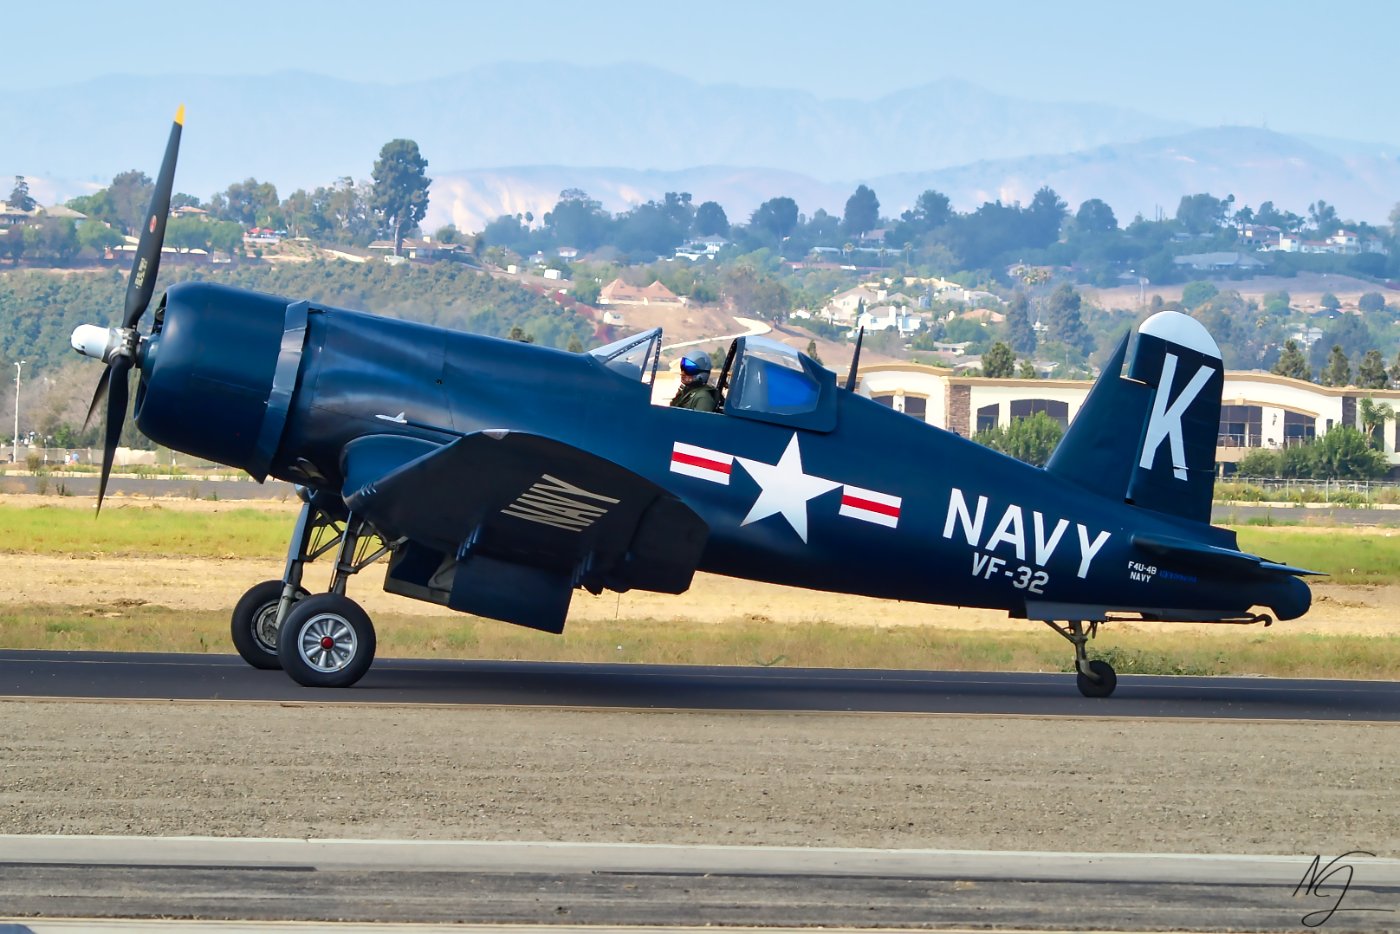 Planes Of Fame Air Museum Vought F4U-1A Corsair NX83782 (VF-32 markings)